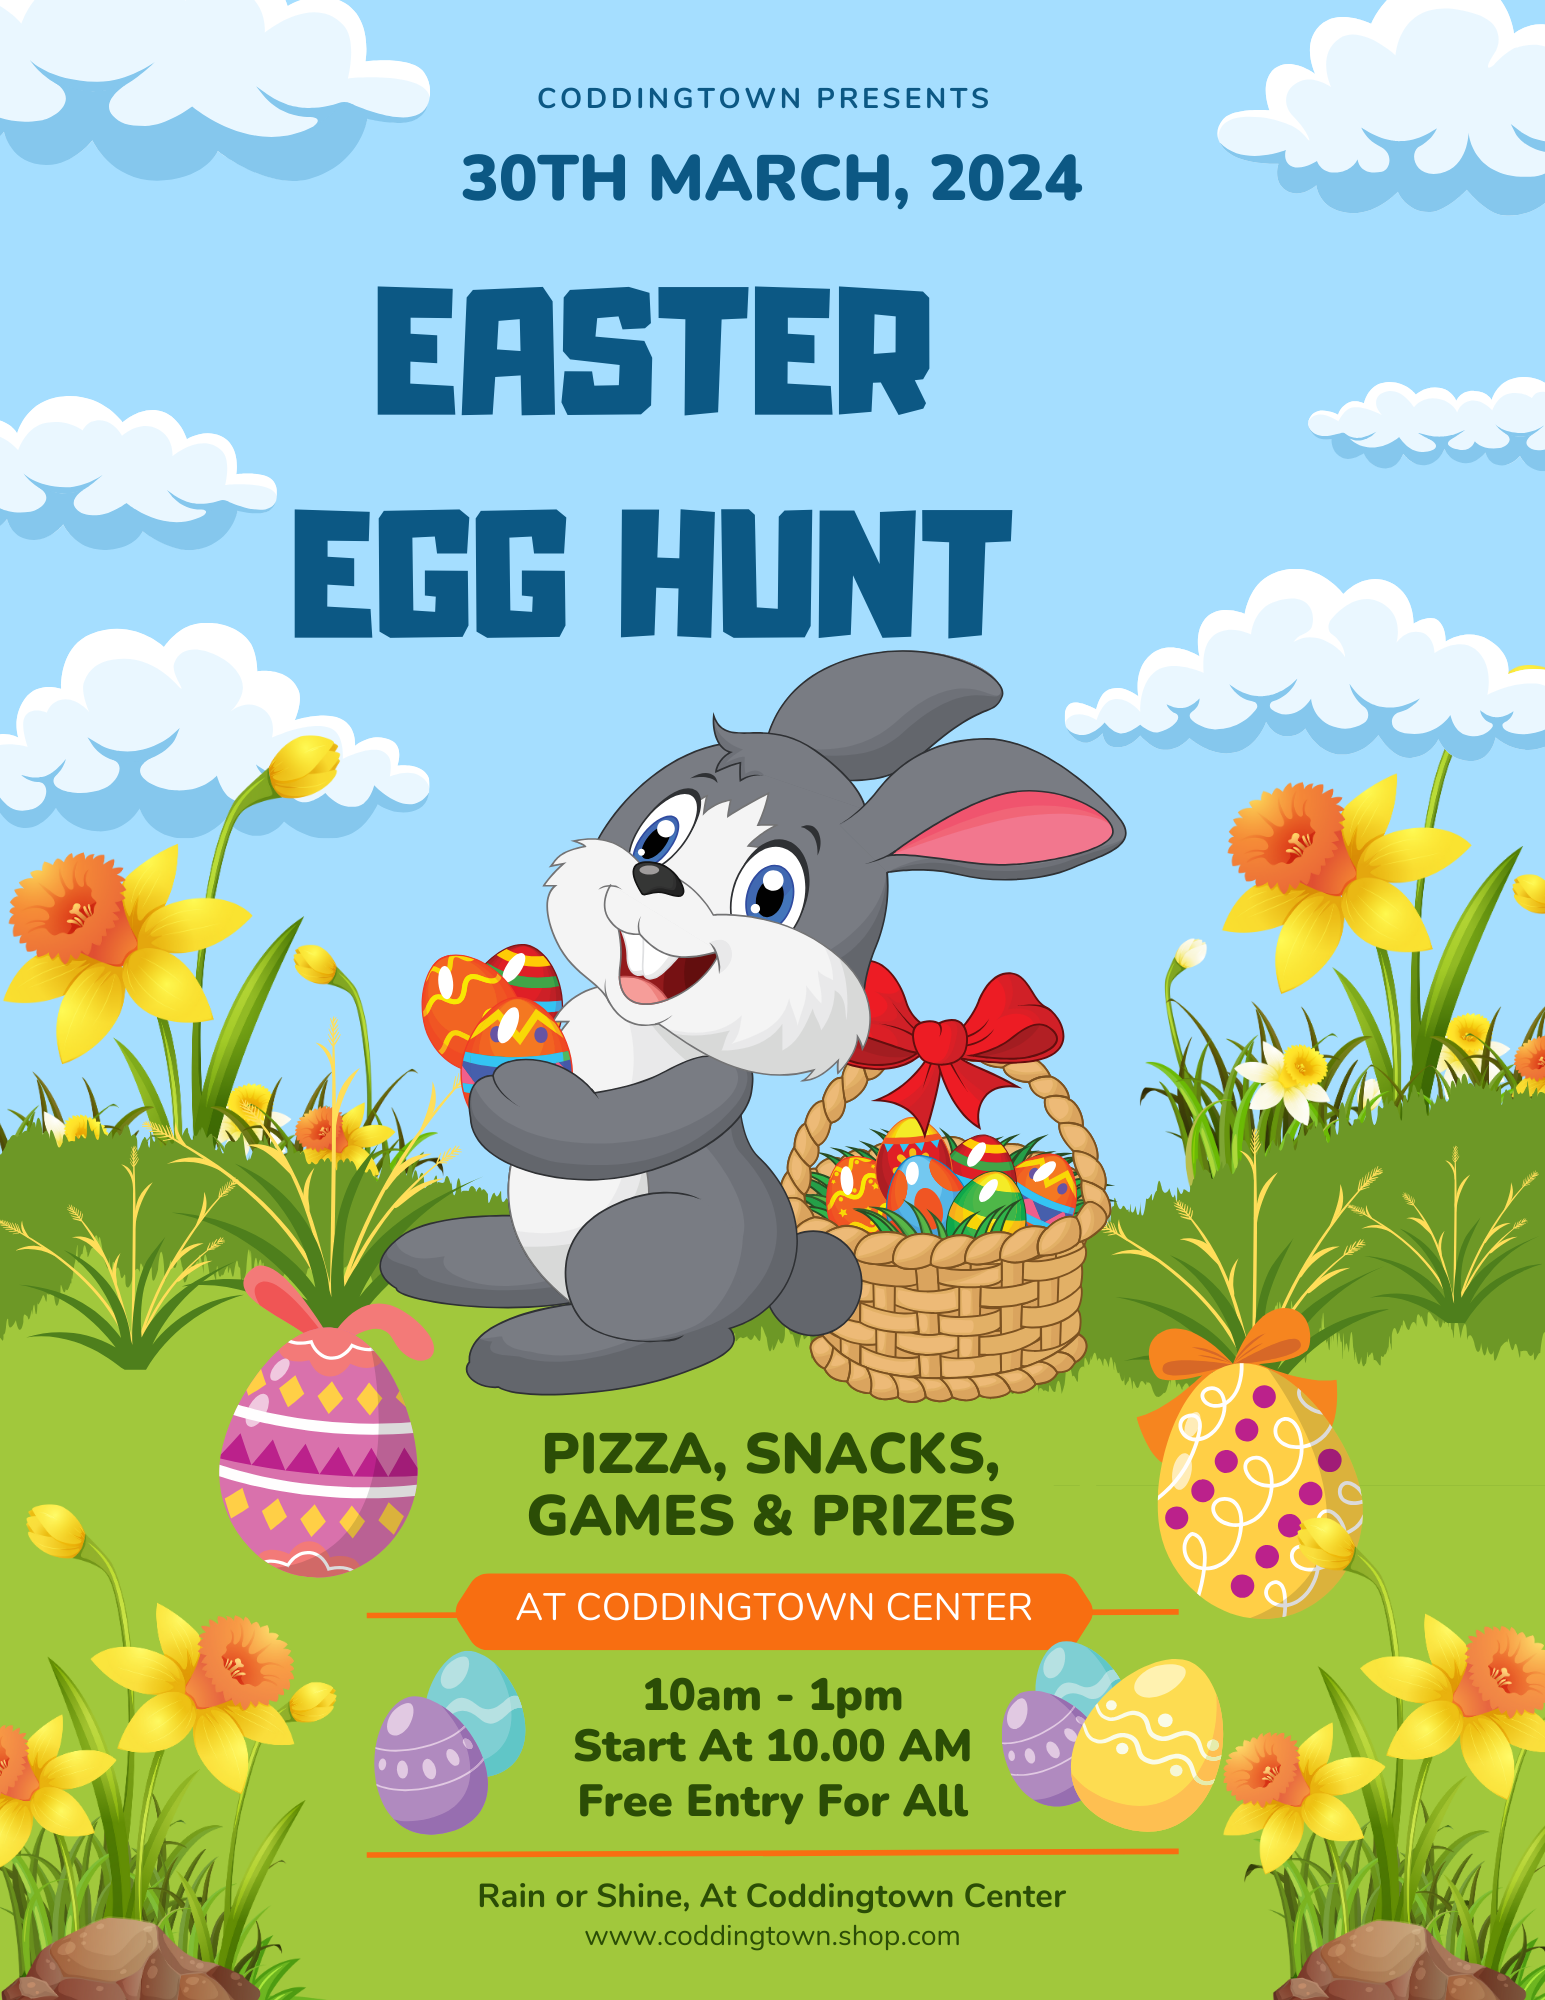 Coddingtown presents, Easter Egg Hunt March 30th, 2024. Pizza, Snacks, Games, & Prizes at Coddingtown Center. Egg Hunt Starts at 10am. Free entry for all. Rain or Shine.